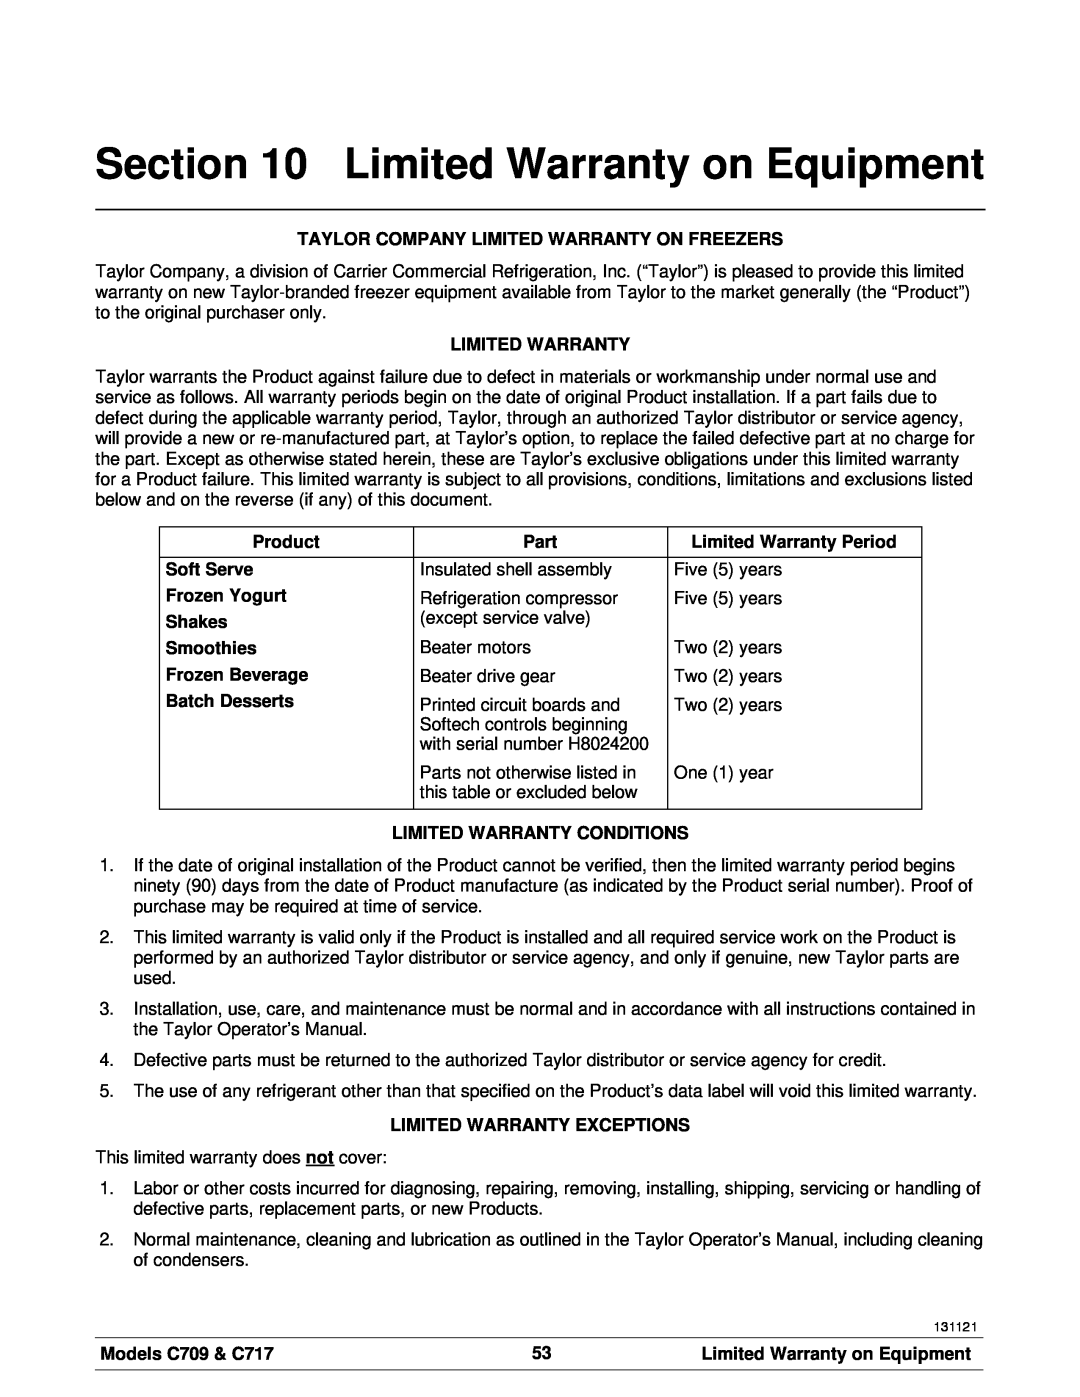 Taylor C717 Limited Warranty on Equipment, Taylor Company Limited Warranty On Freezers, Product, Part, Soft Serve, Shakes 